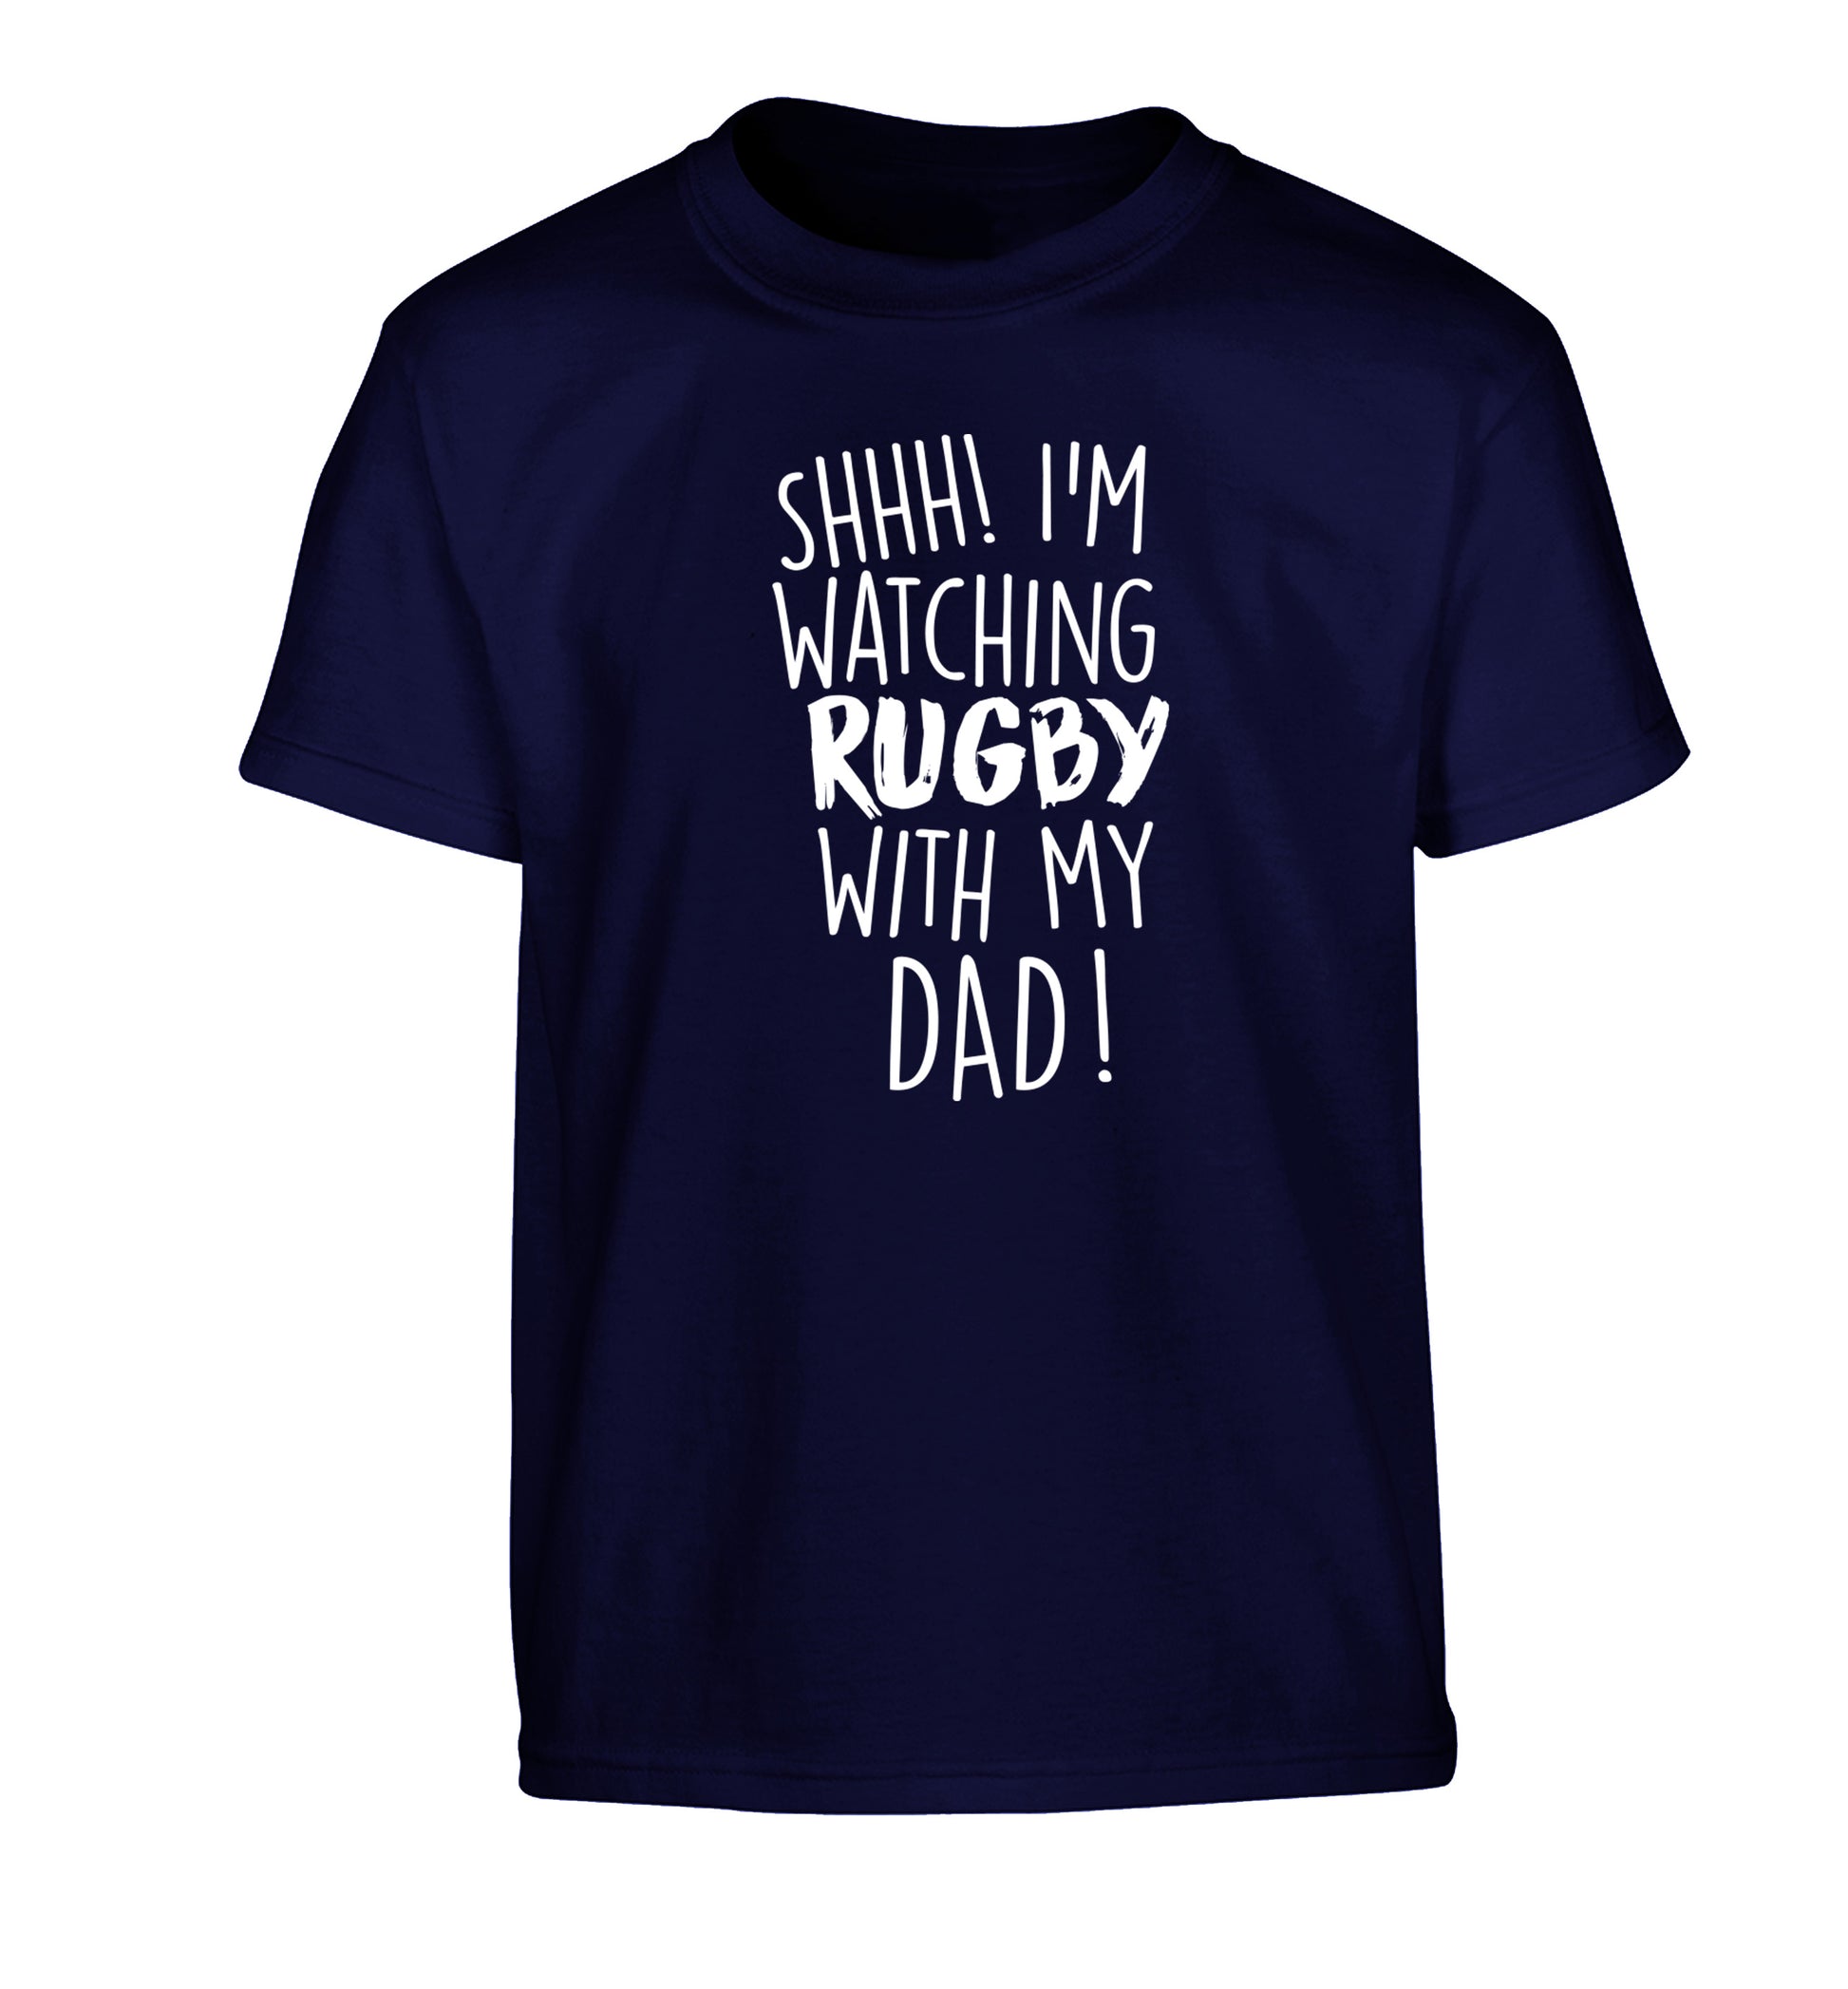 Shh... I'm watching rugby with my dad Children's navy Tshirt 12-13 Years